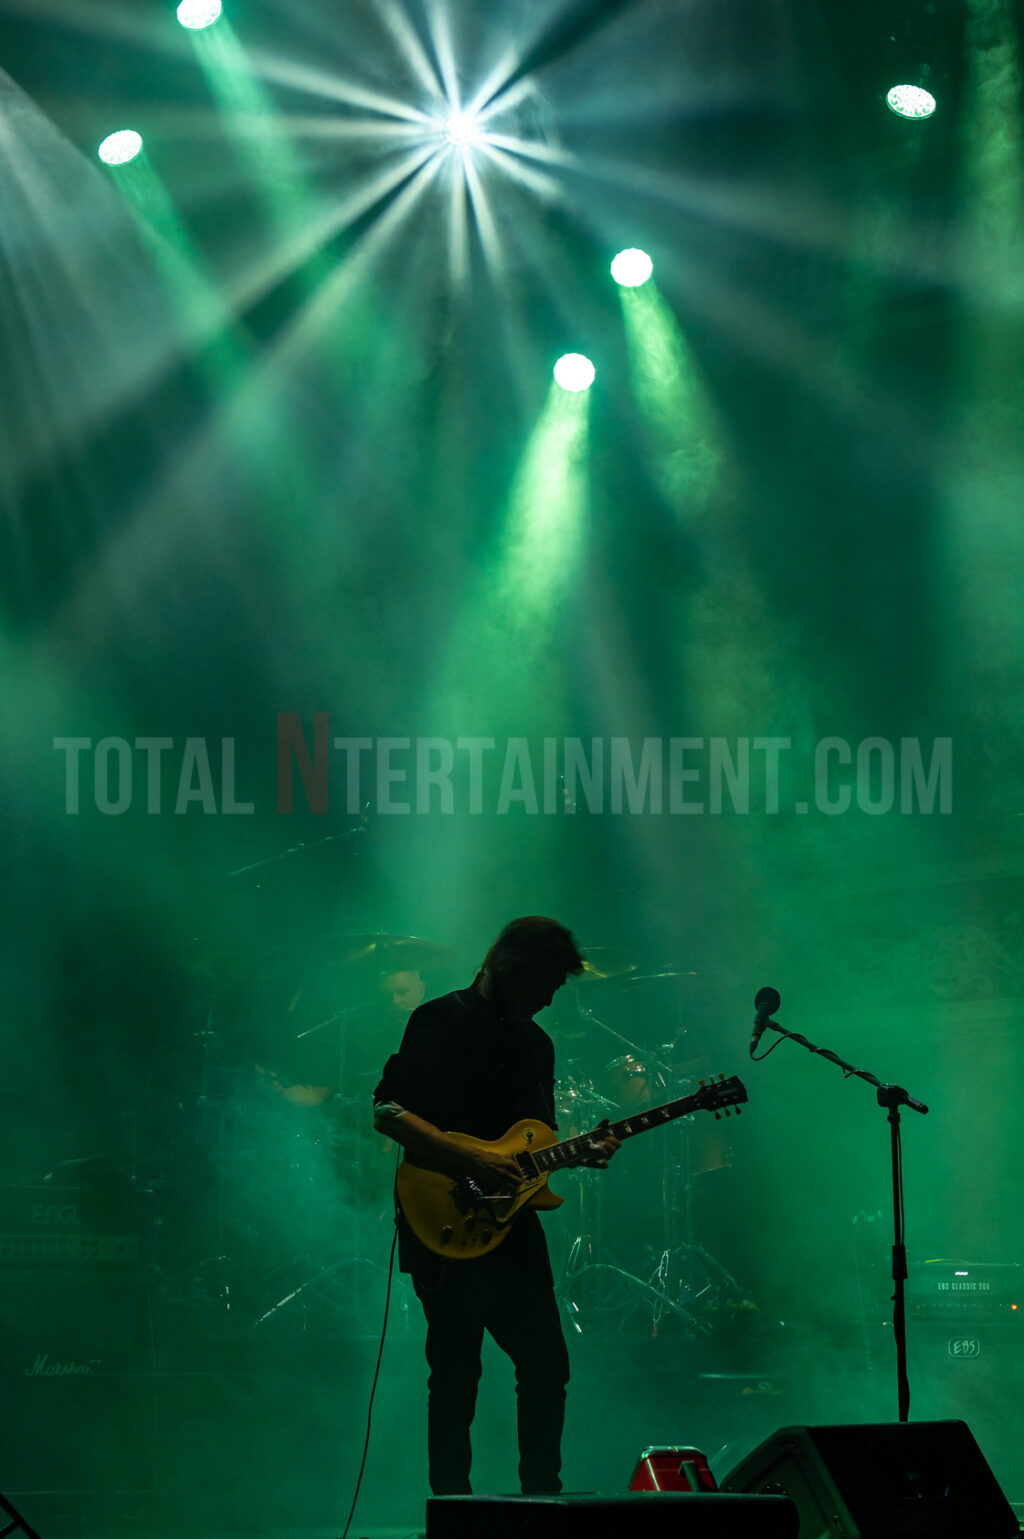 Steve Hackett, Genesis Revisited, Mark Ellis, Music Review, TotalNtertainment, Seconds Out + More